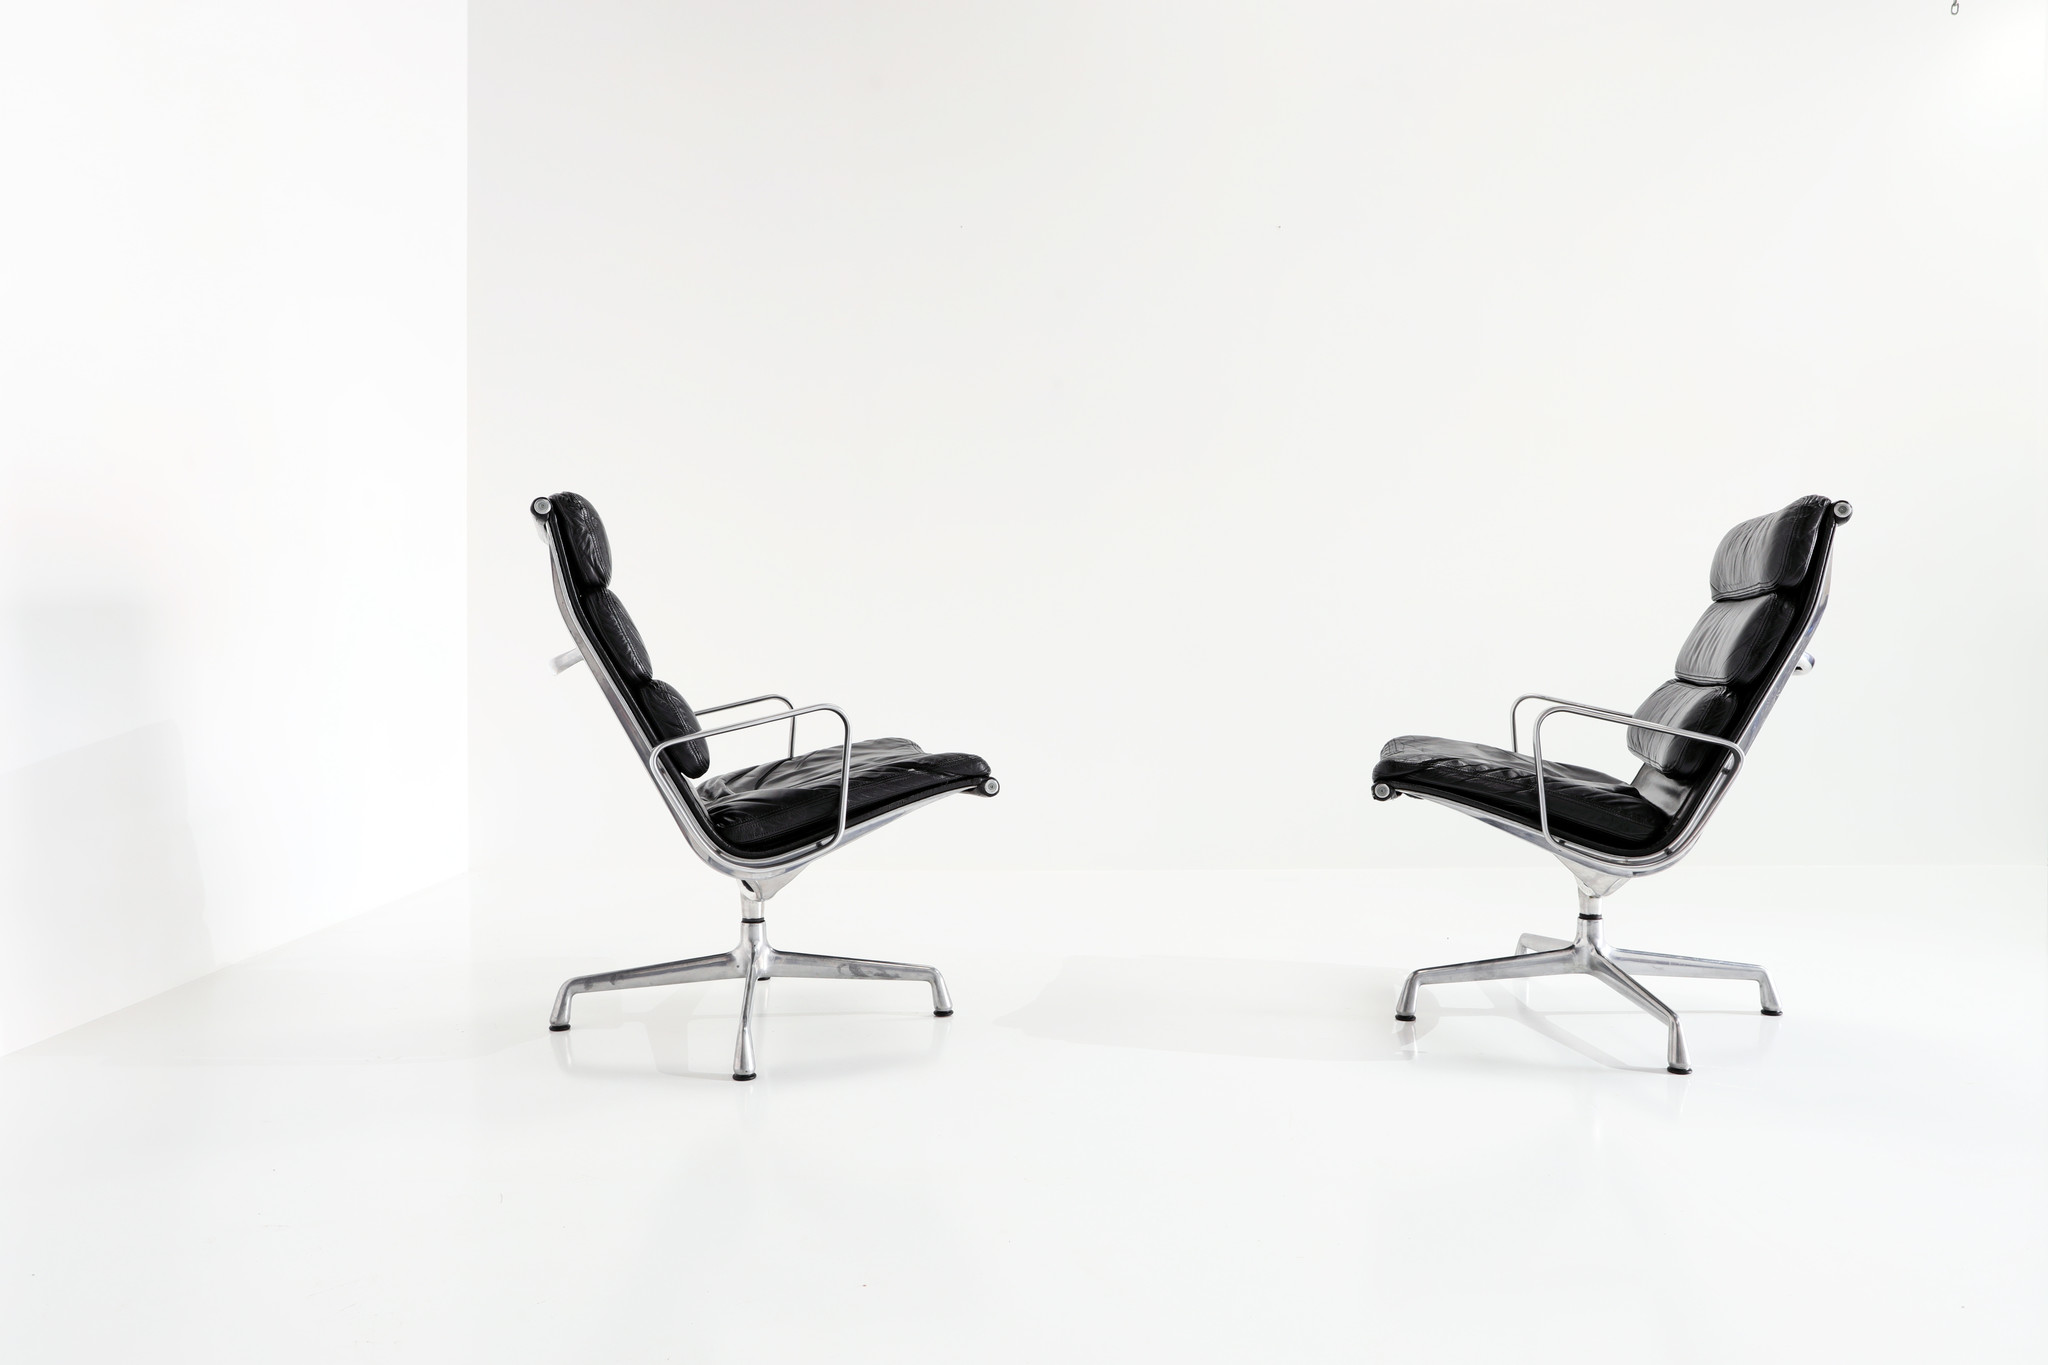 Lounge soft pad chairs designed by Charles Eames for Herman Miller